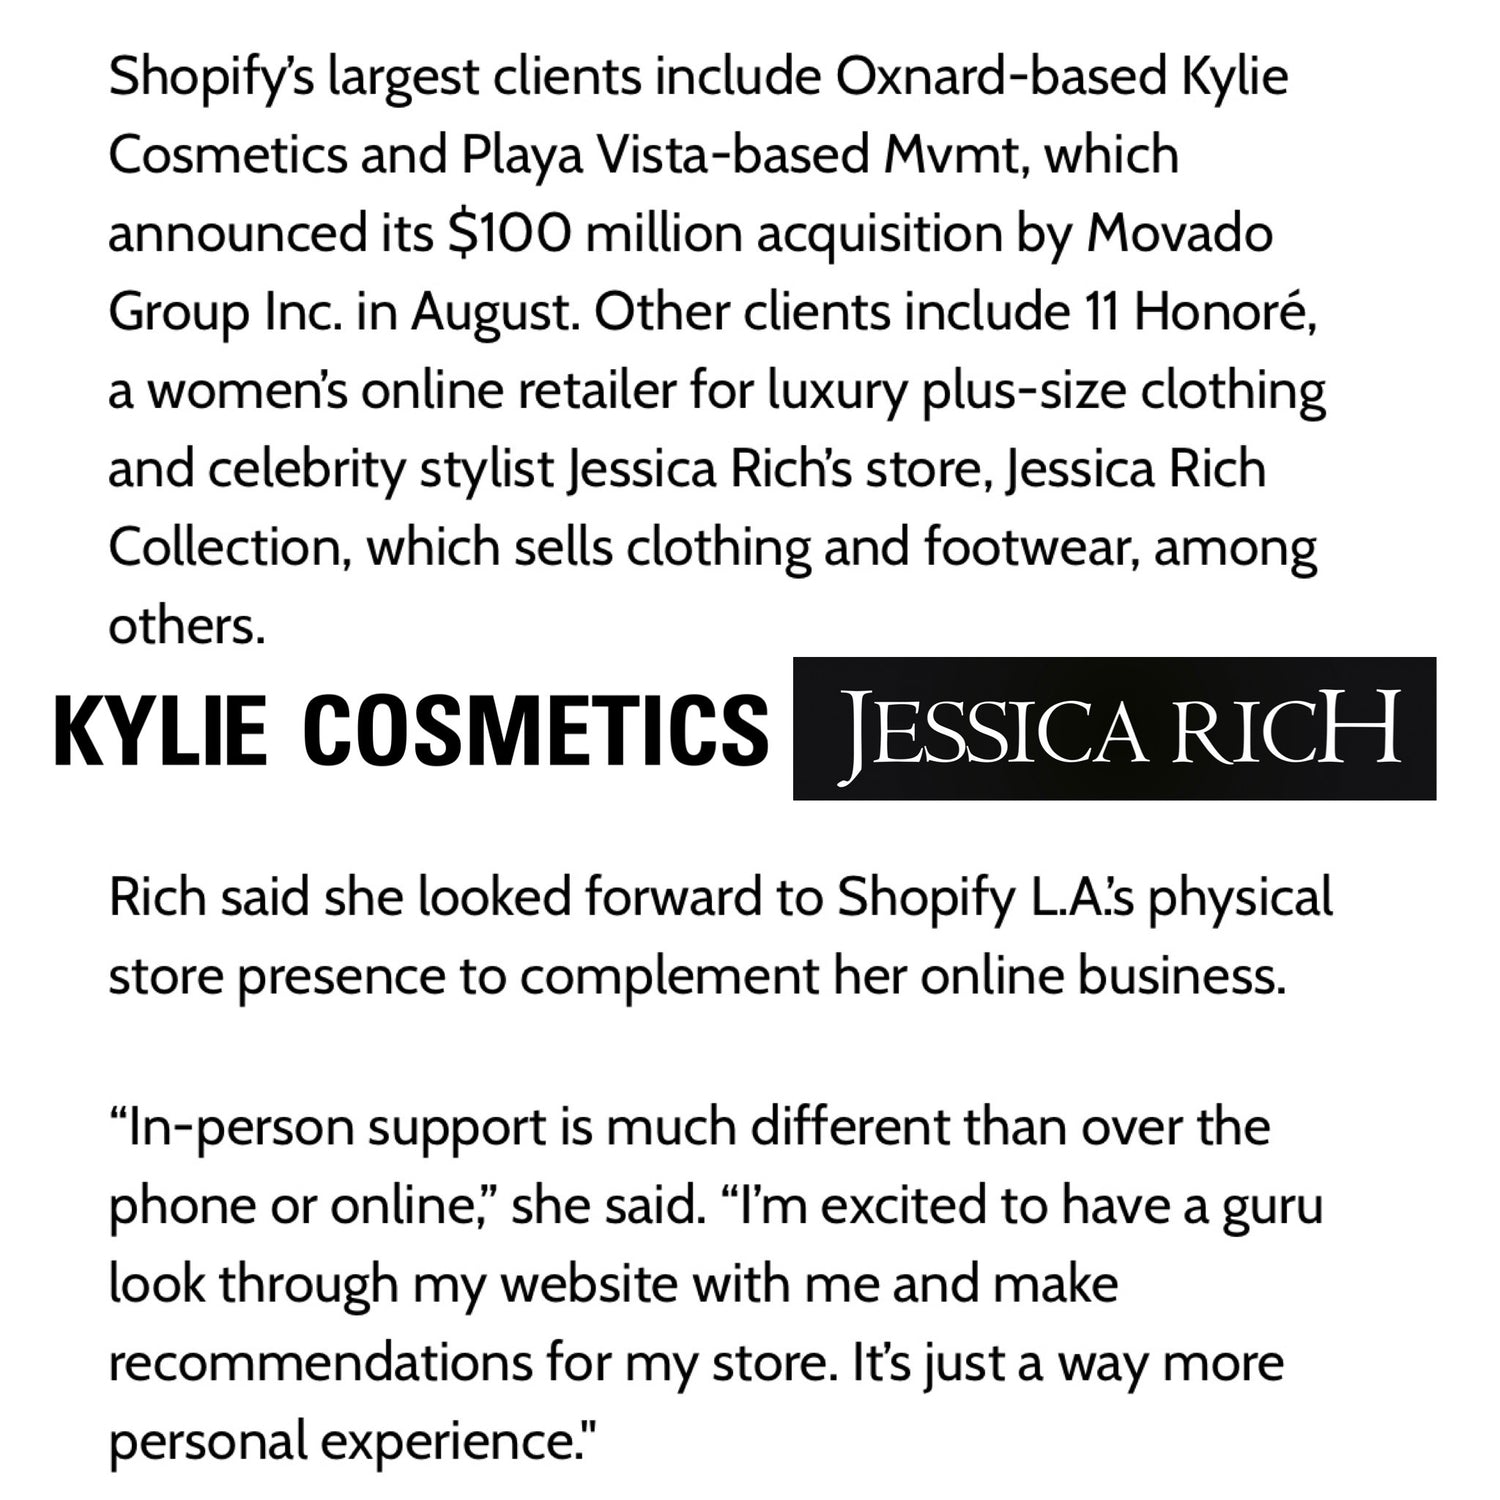 JESSICA RICH FEATURED IN LA BUSINESS JOURNAL